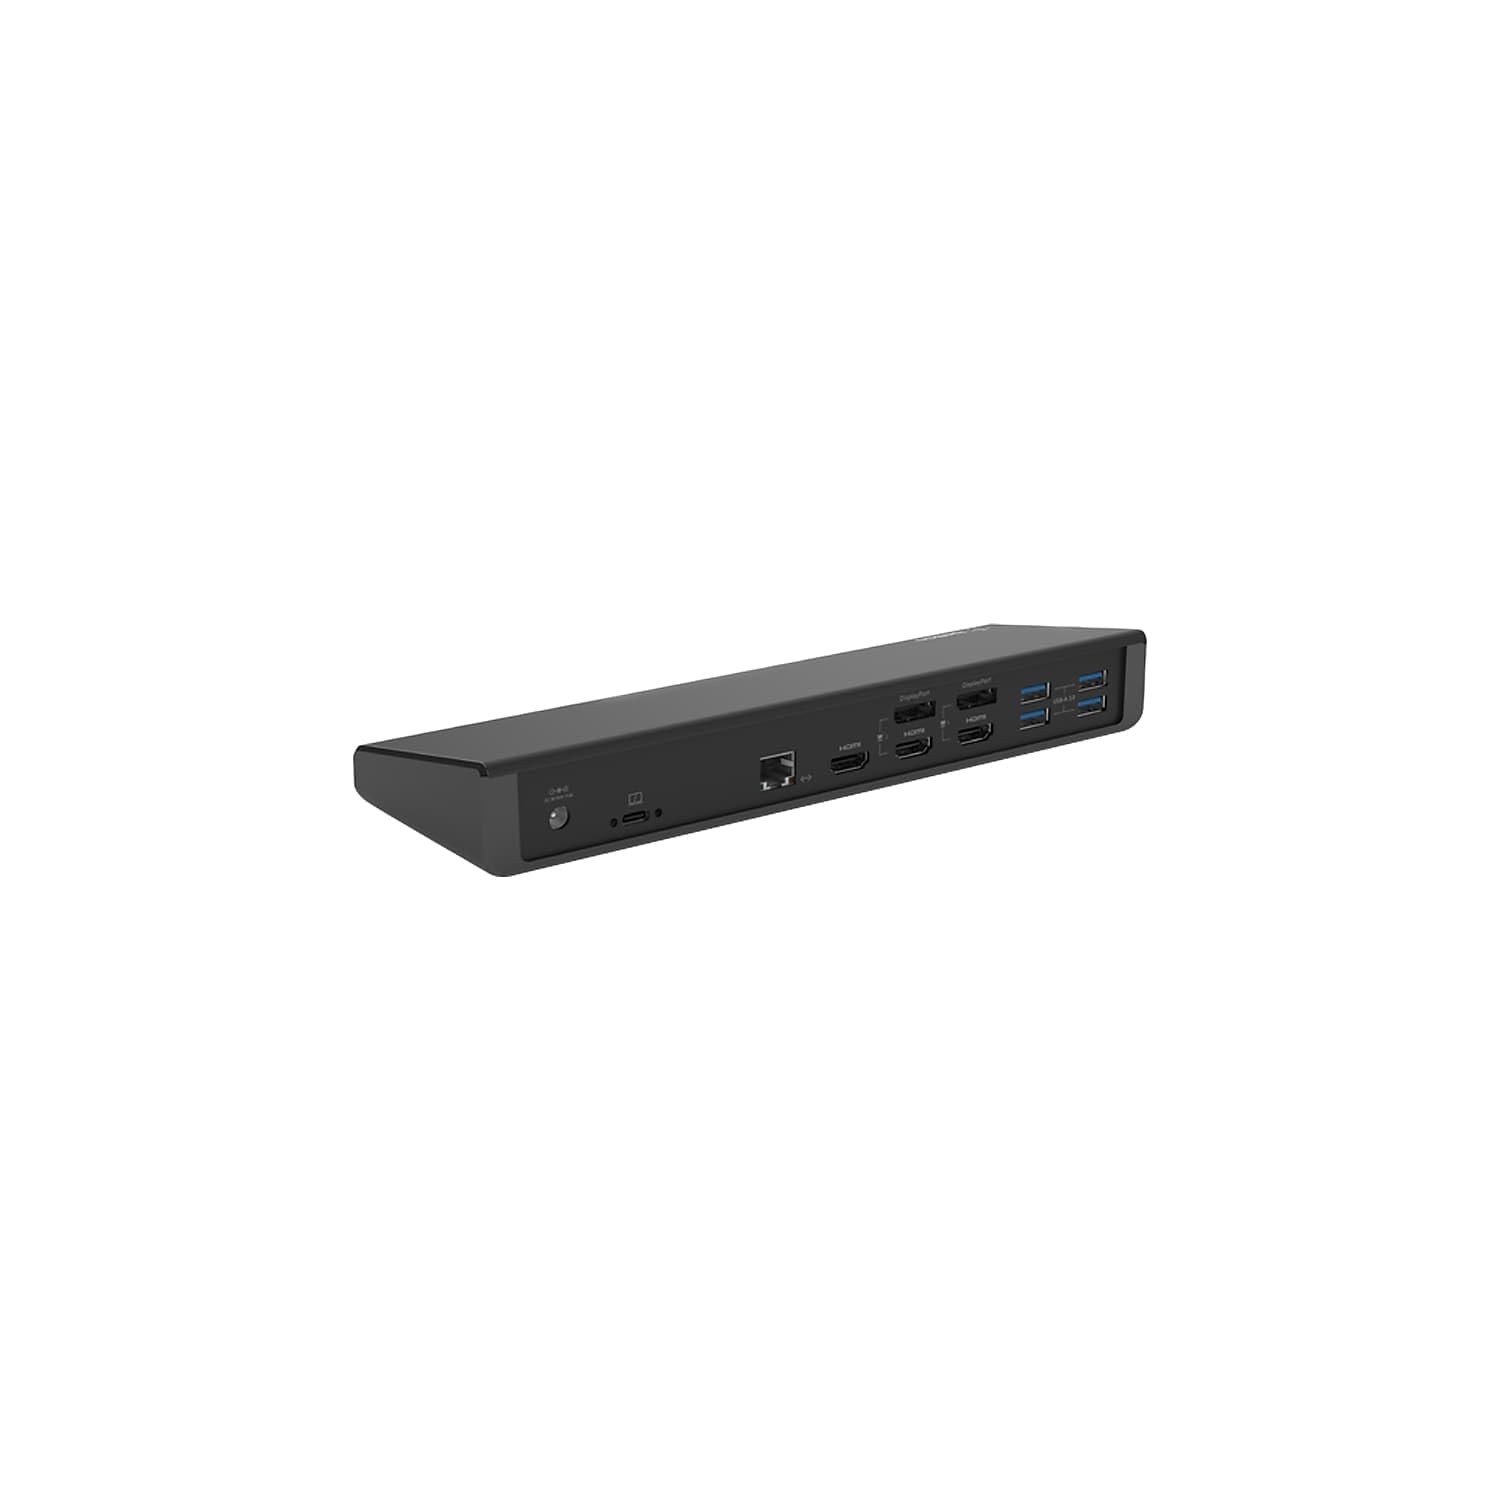 Belkin Triple Display DisplayLink Docking Station Hub with 3 HDMI Ports, 2 DisplayPorts for Triple 4K Display with 85W Power Delivery, Gigabit Ethernet, 3.5mm Mic/Speaker, 1 USB-C and 5 USB-A Ports